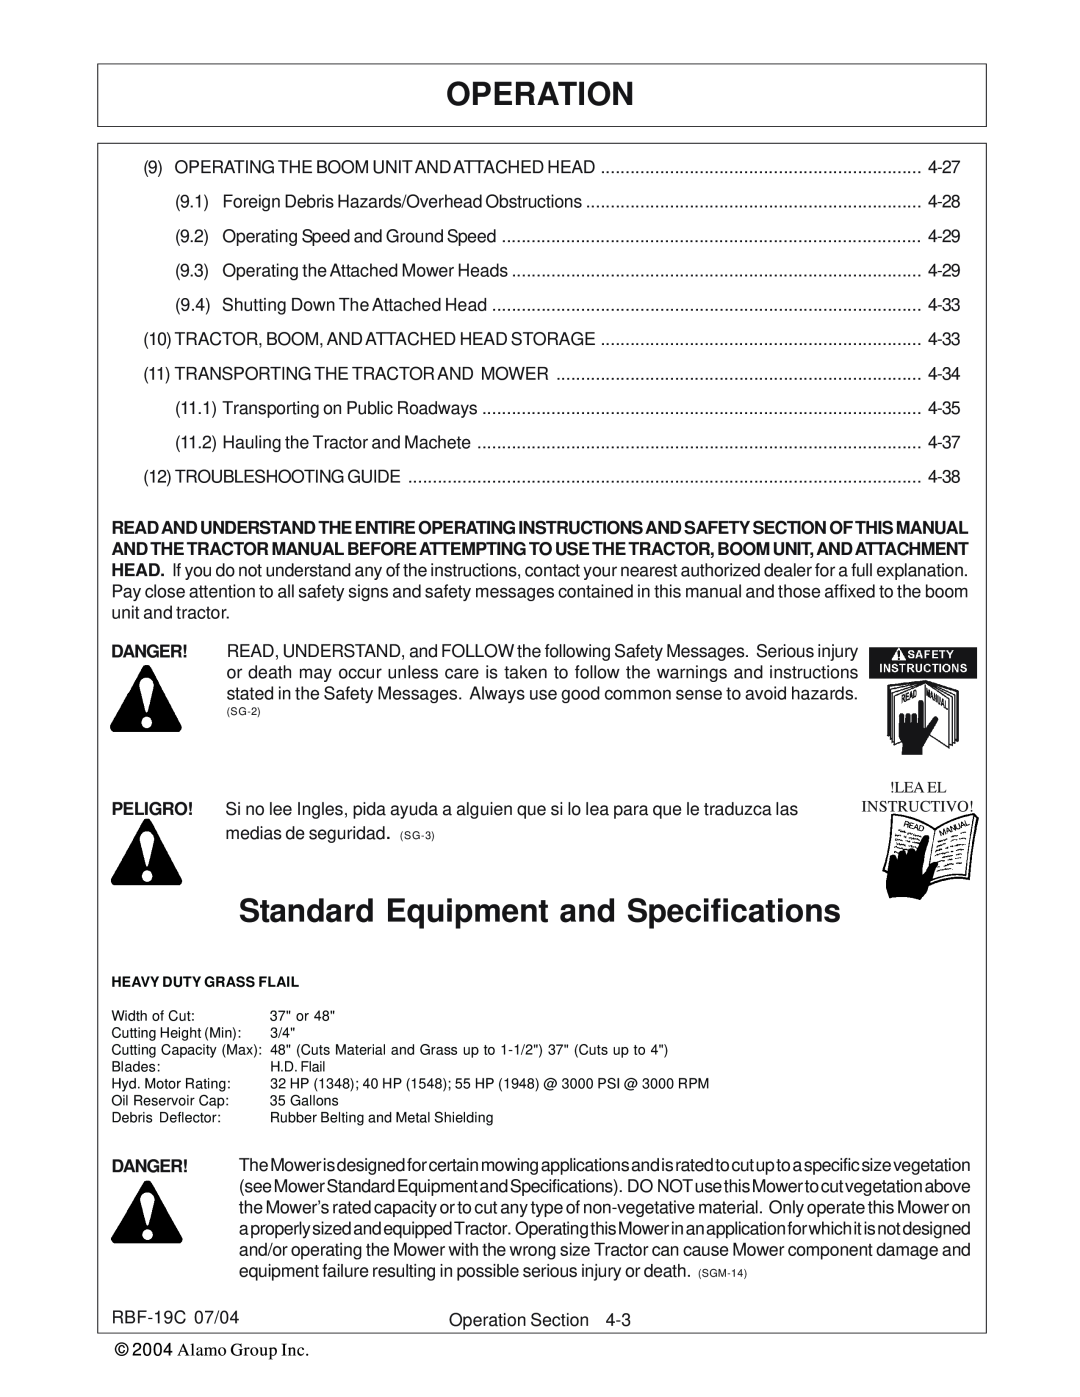 Tiger RBF-19C manual Operation, Standard Equipment and Specifications 